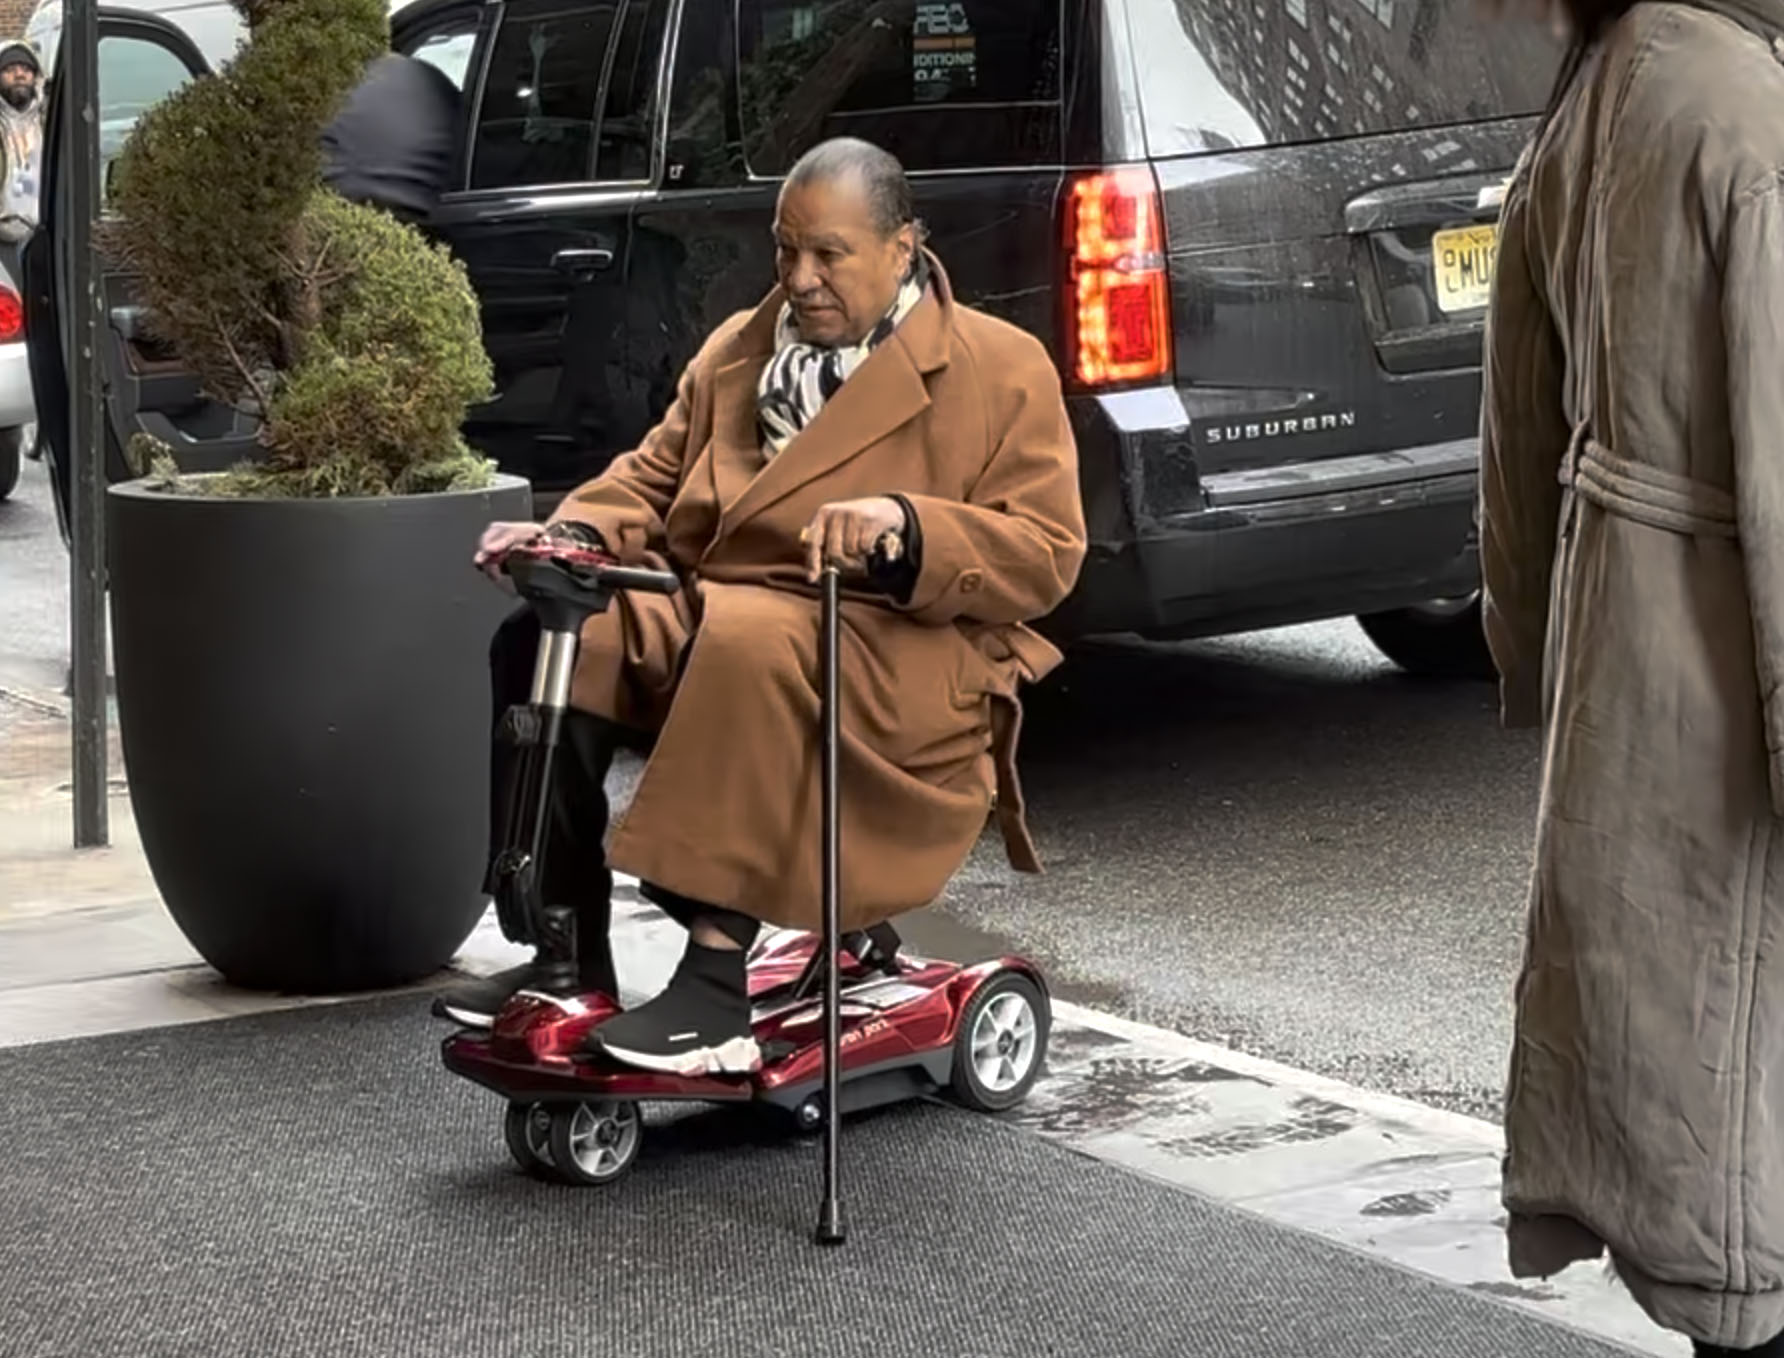 The 86-year-old was unrecognizable in an electric scooter